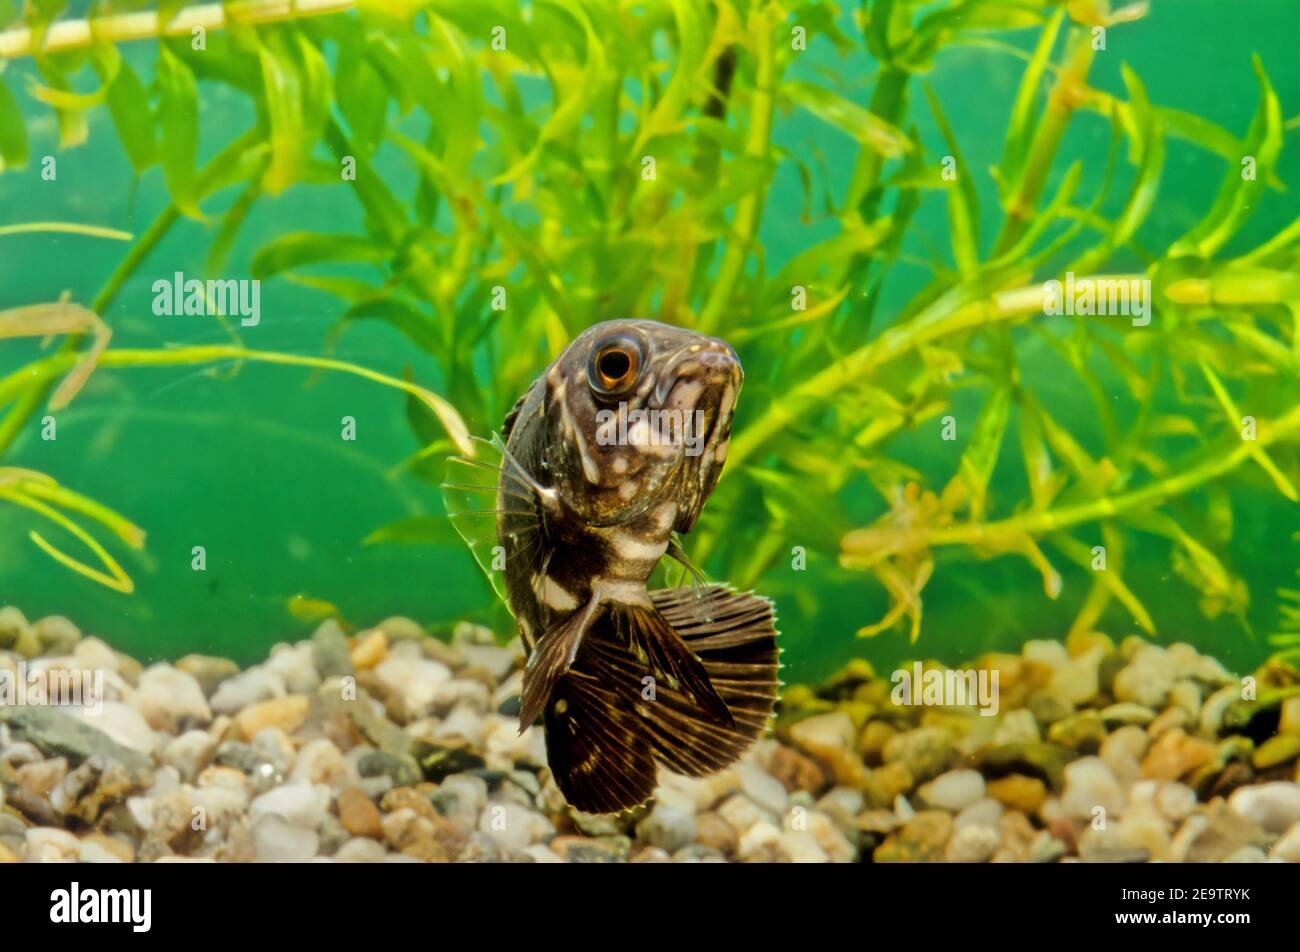 The oscar (Astronotus ocellatus) is a species of fish from the cichlid family known under a variety of common names, including tiger oscar, velvet cic Stock Photo